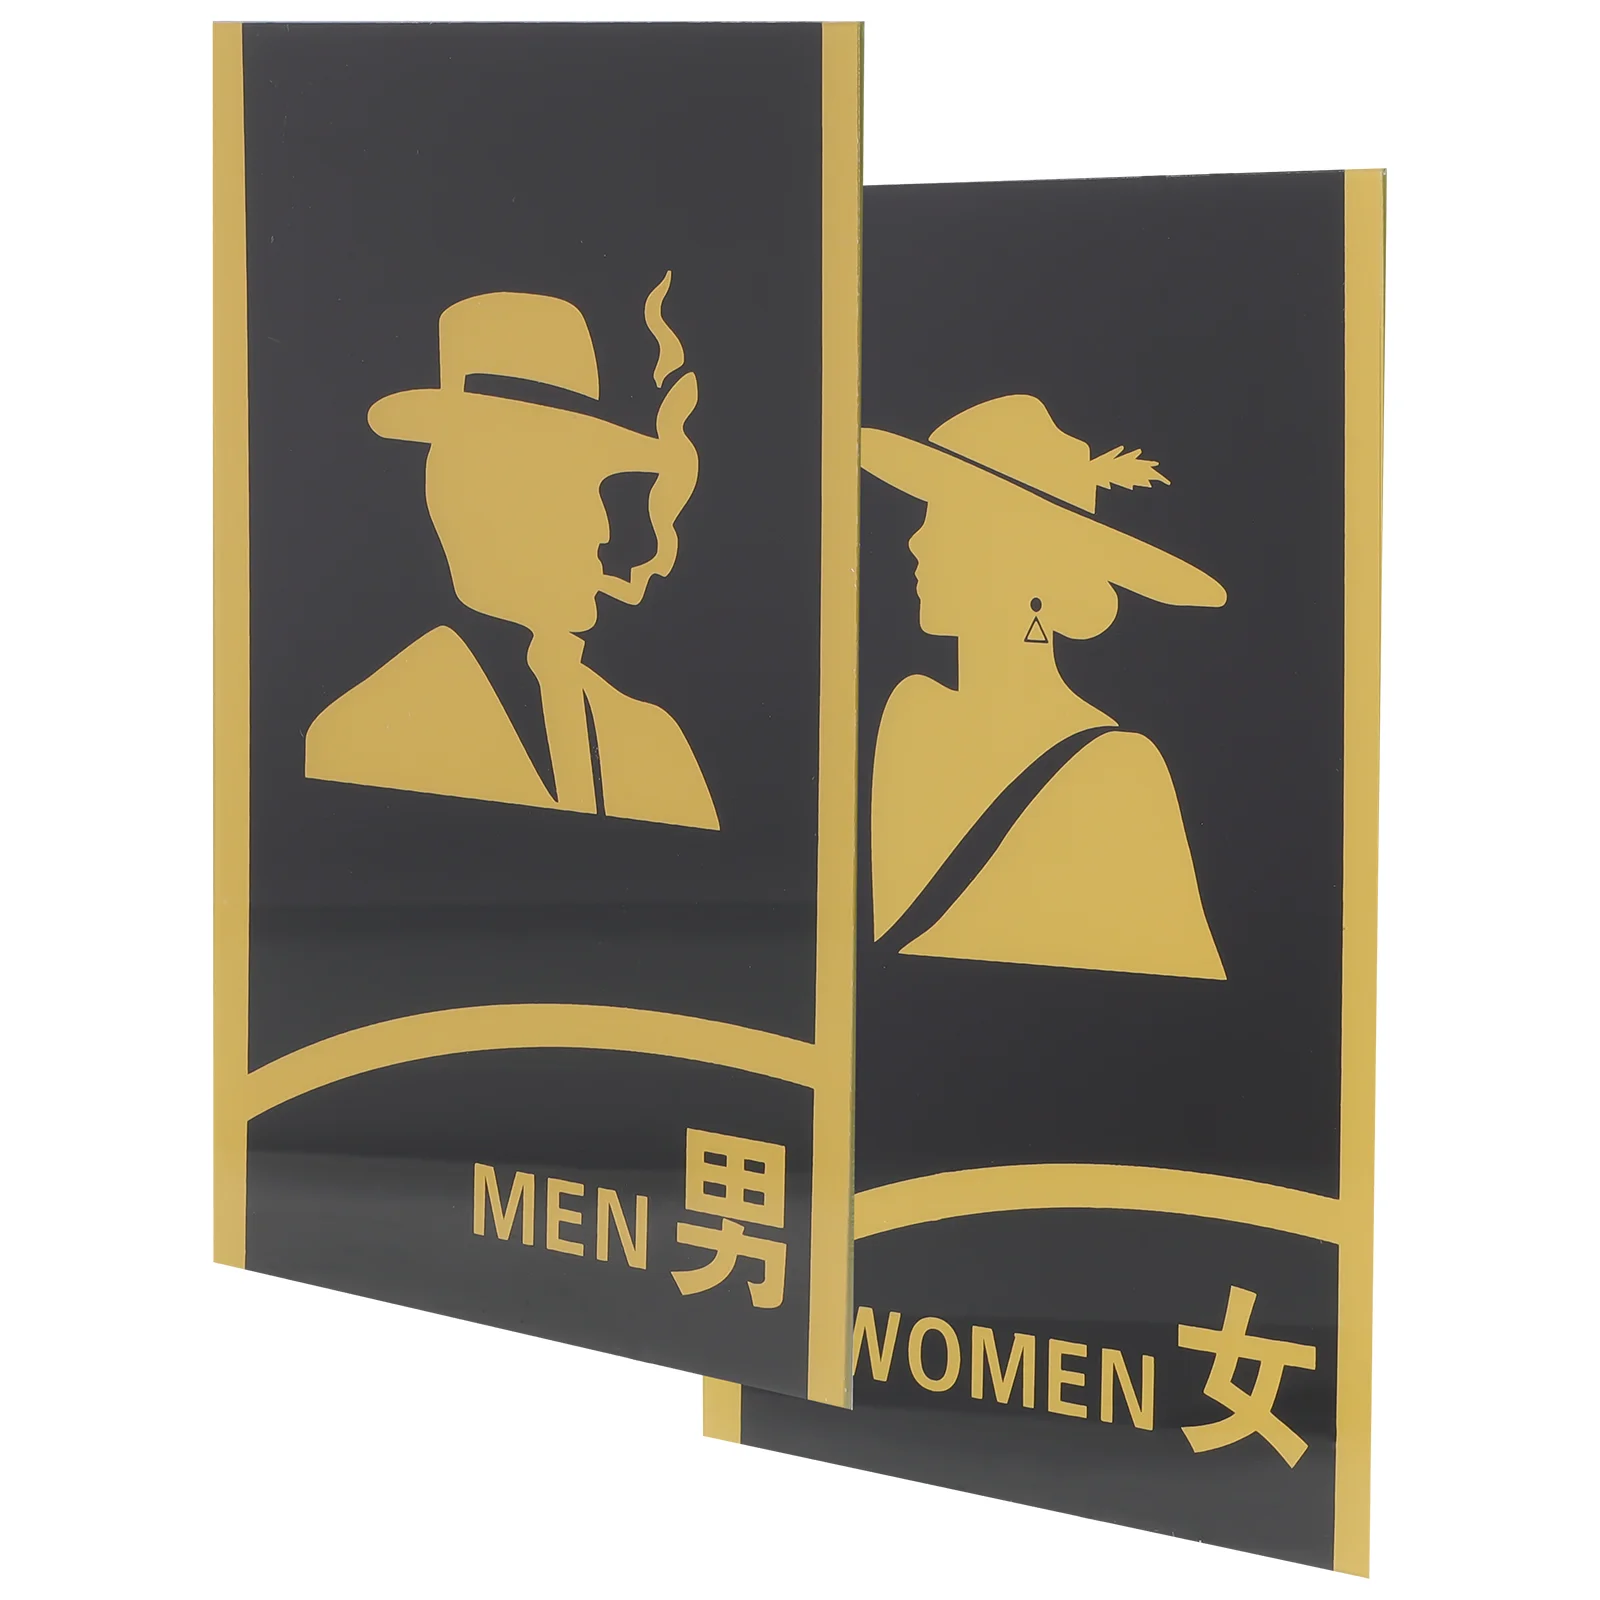 

Sign Toilet Restroom Bathroom Door Plate Gender Symbol Signs Led Lavatory Tag Women Name Male Man Woman Acrylic Mall Business Wc